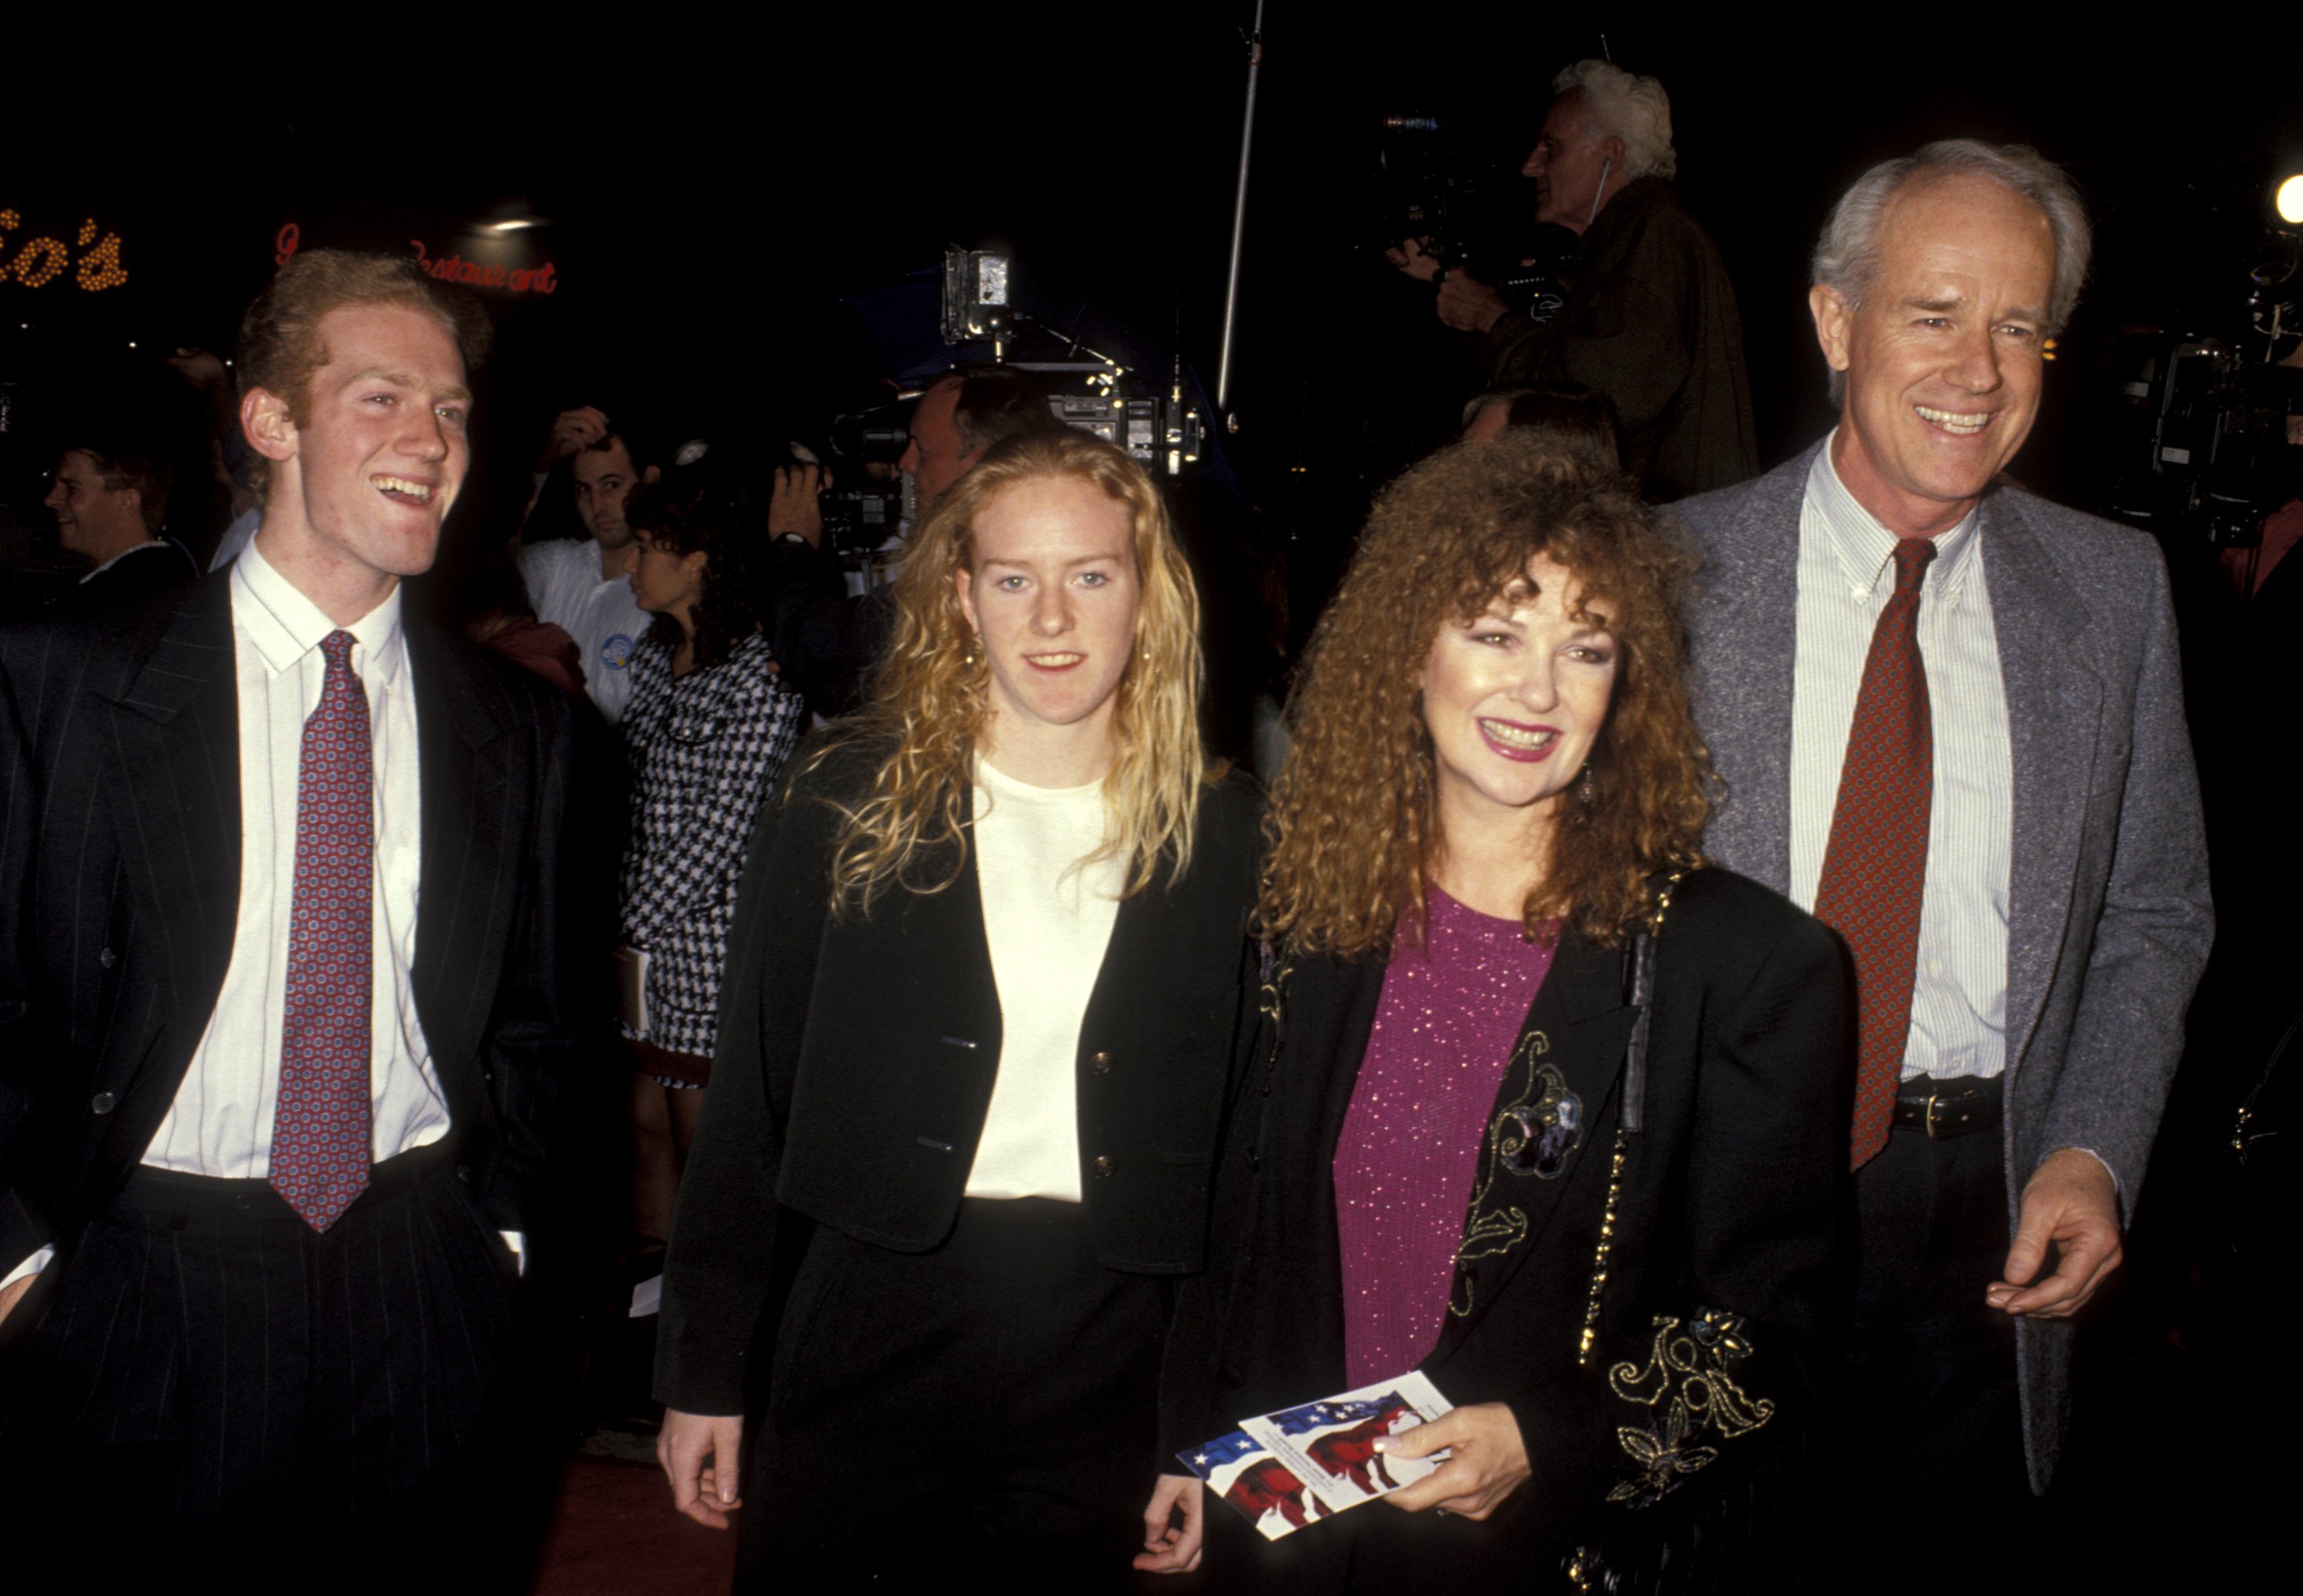 Mike Farrell, Jr., Erin Farrell, Shelley Fabares, and Mike Farrell at the "JFK" world premiere on December 17, 1991 | Source: Getty Images